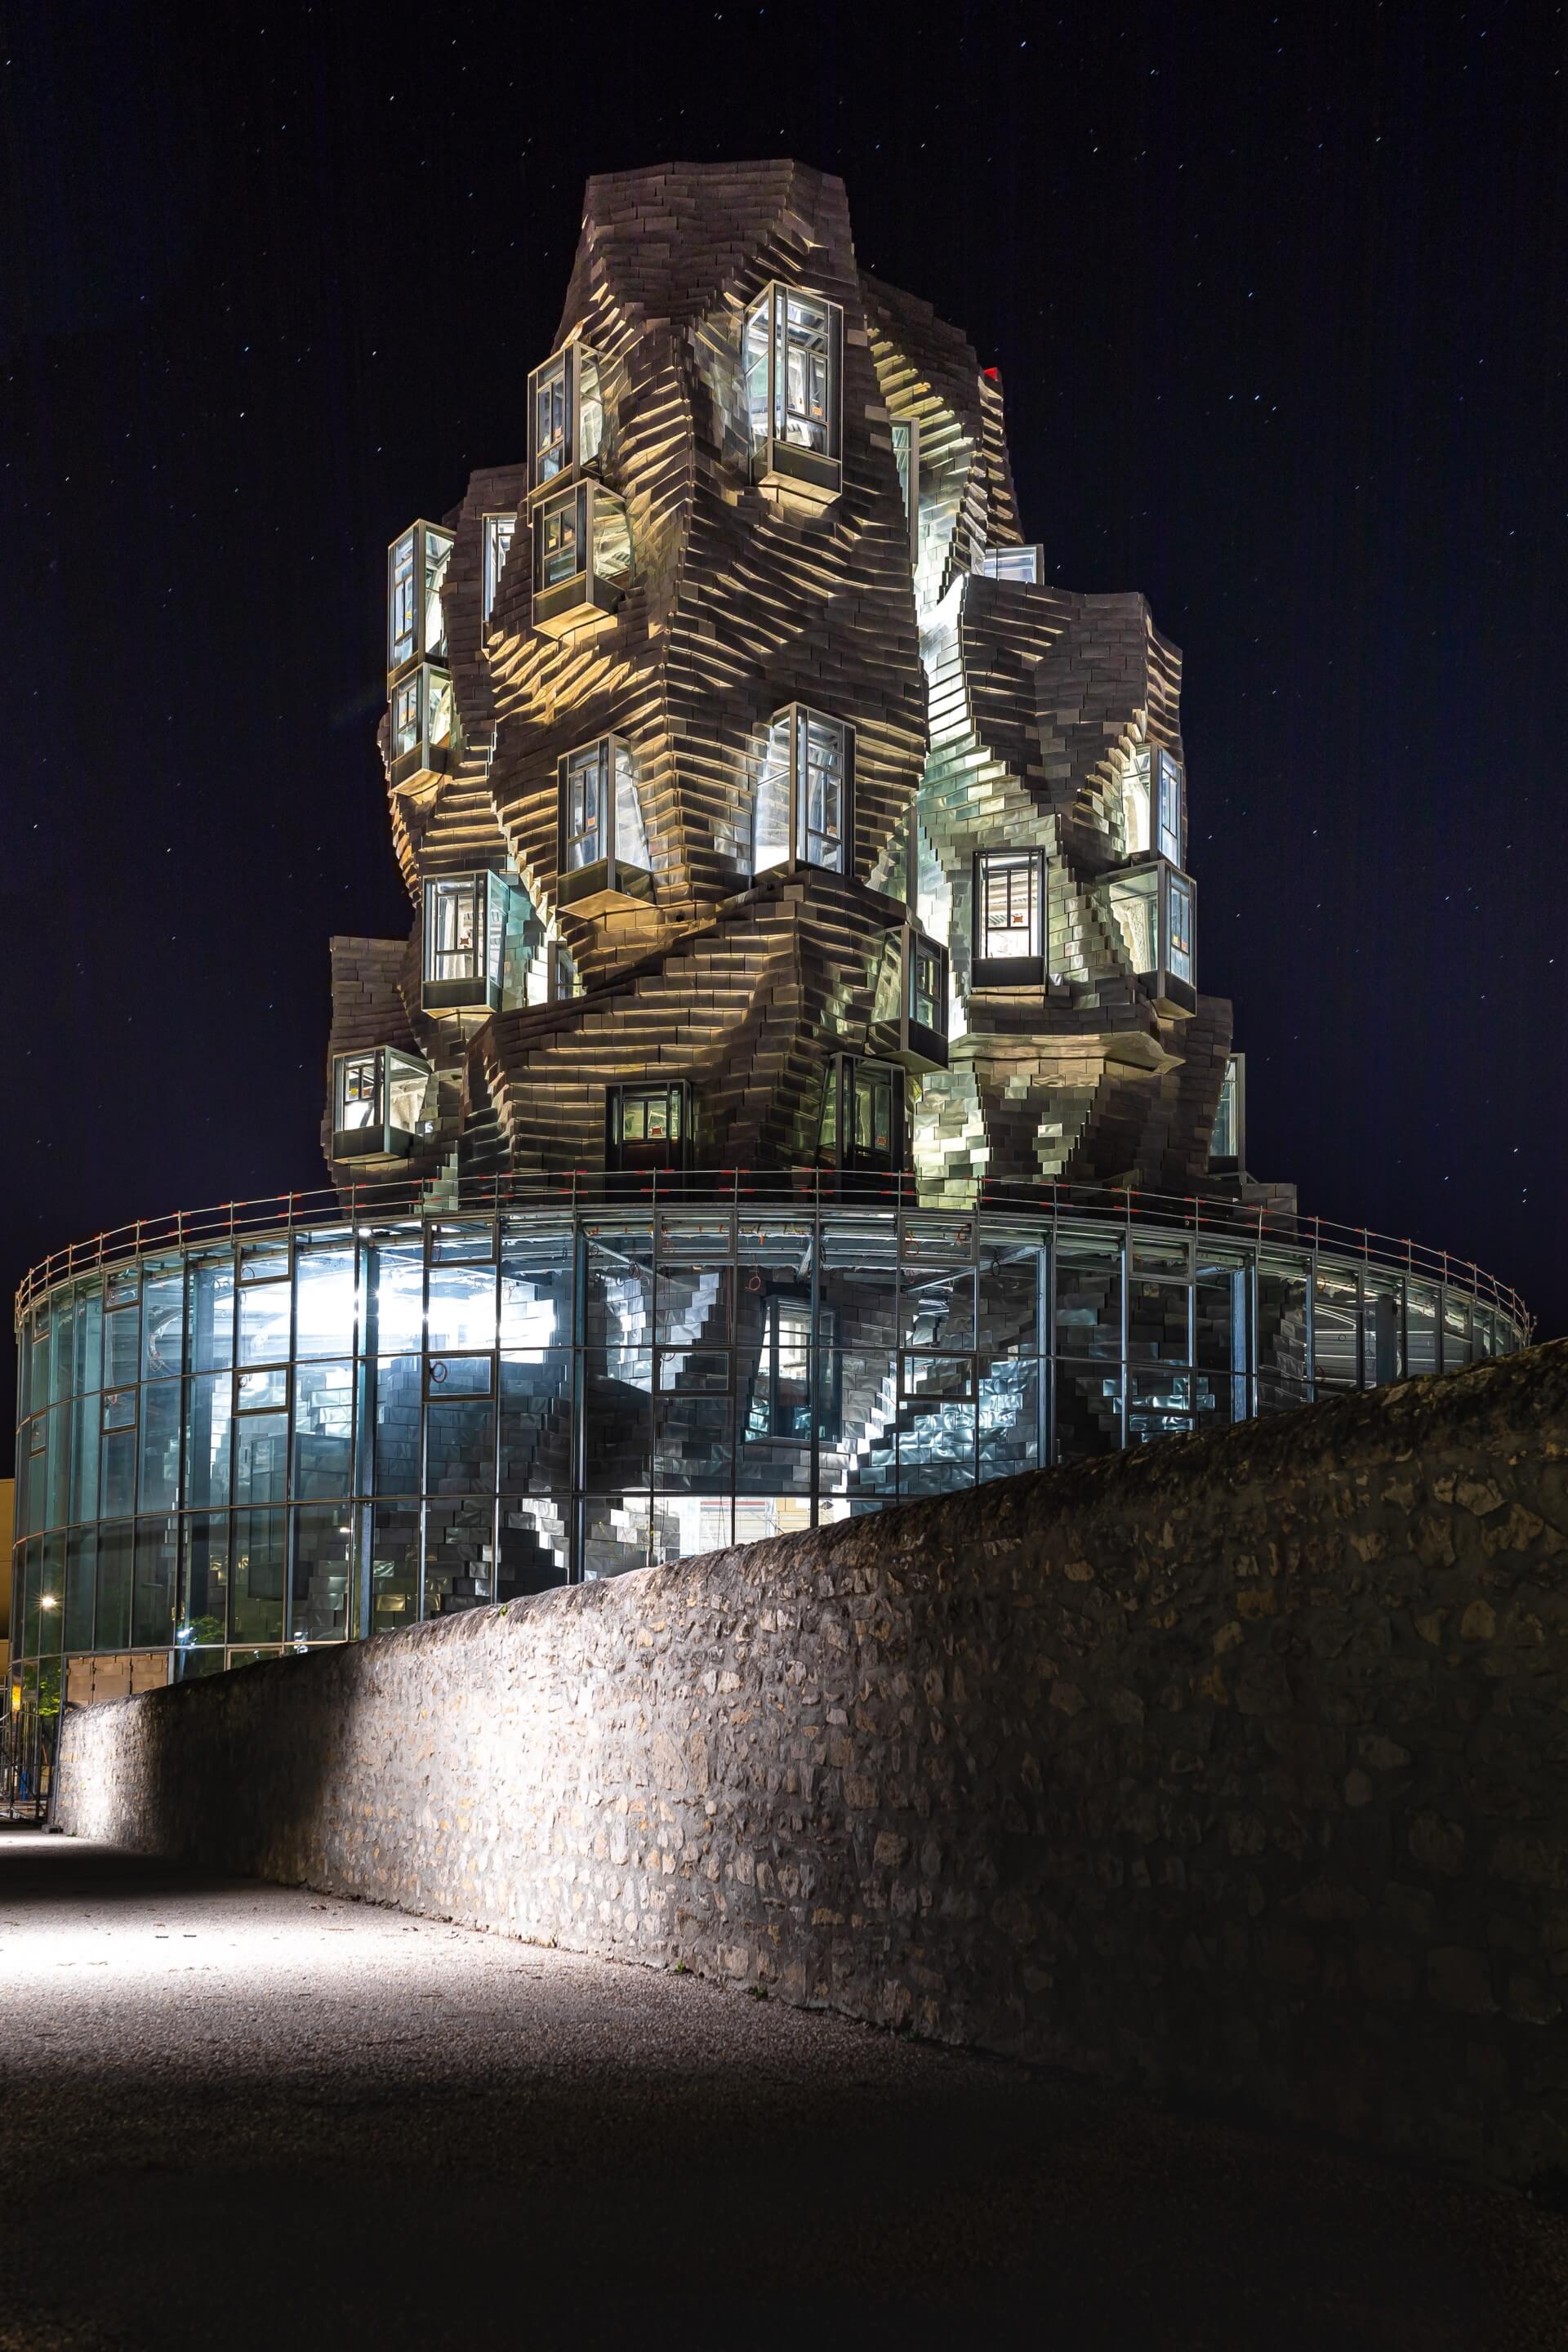 A twisted metal tower atop a circular structure, photographed at night in Loma Arles